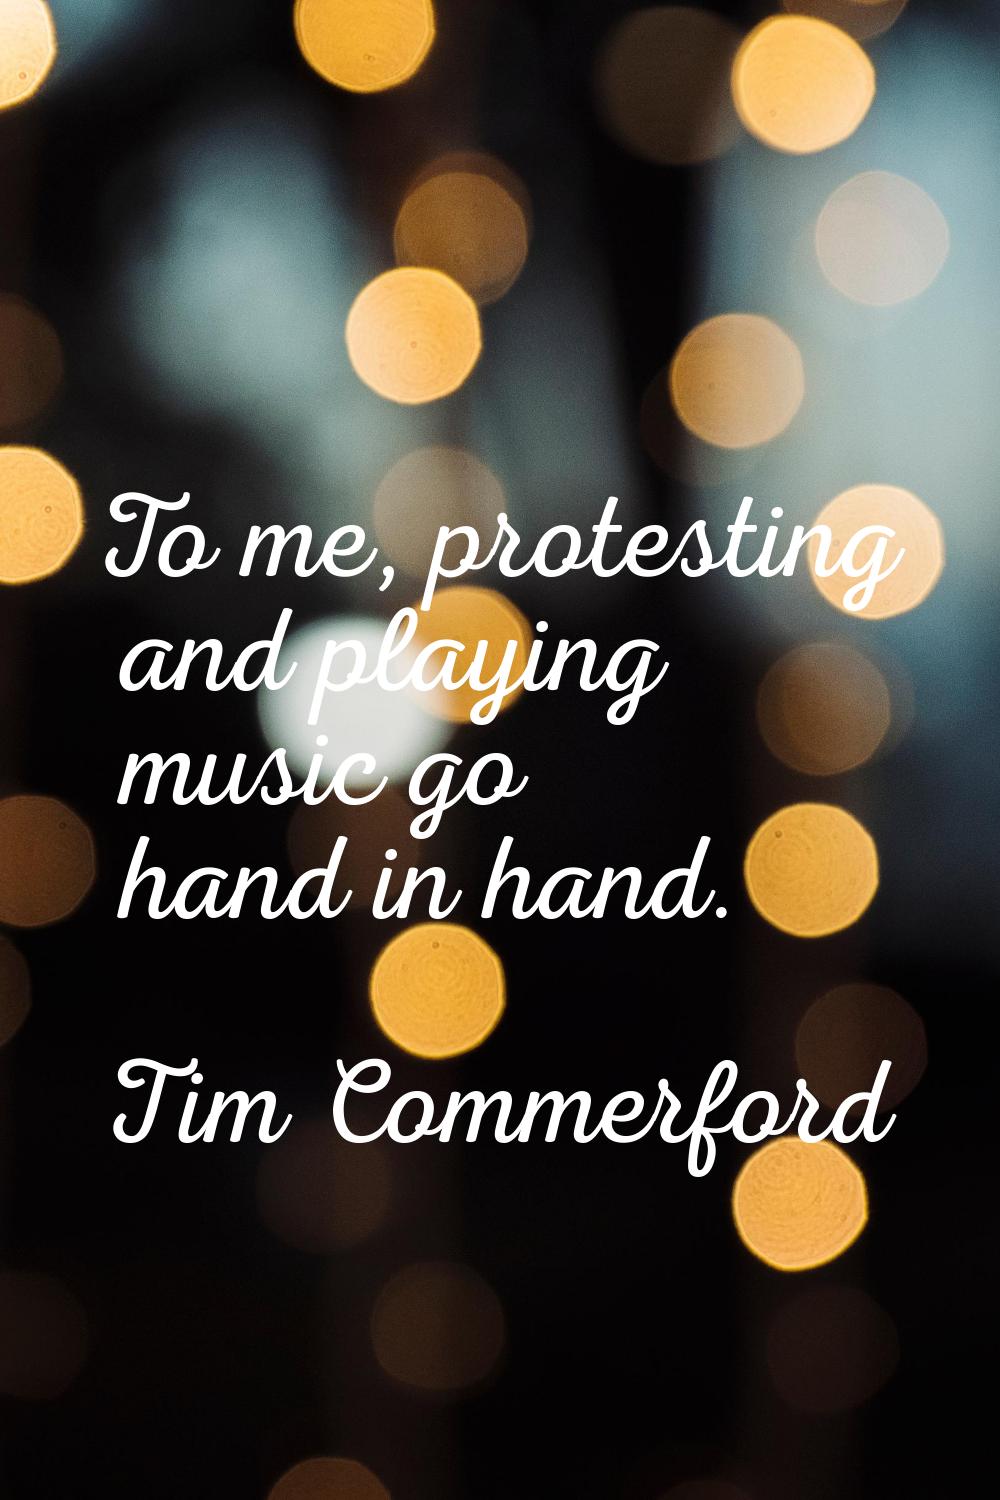 To me, protesting and playing music go hand in hand.